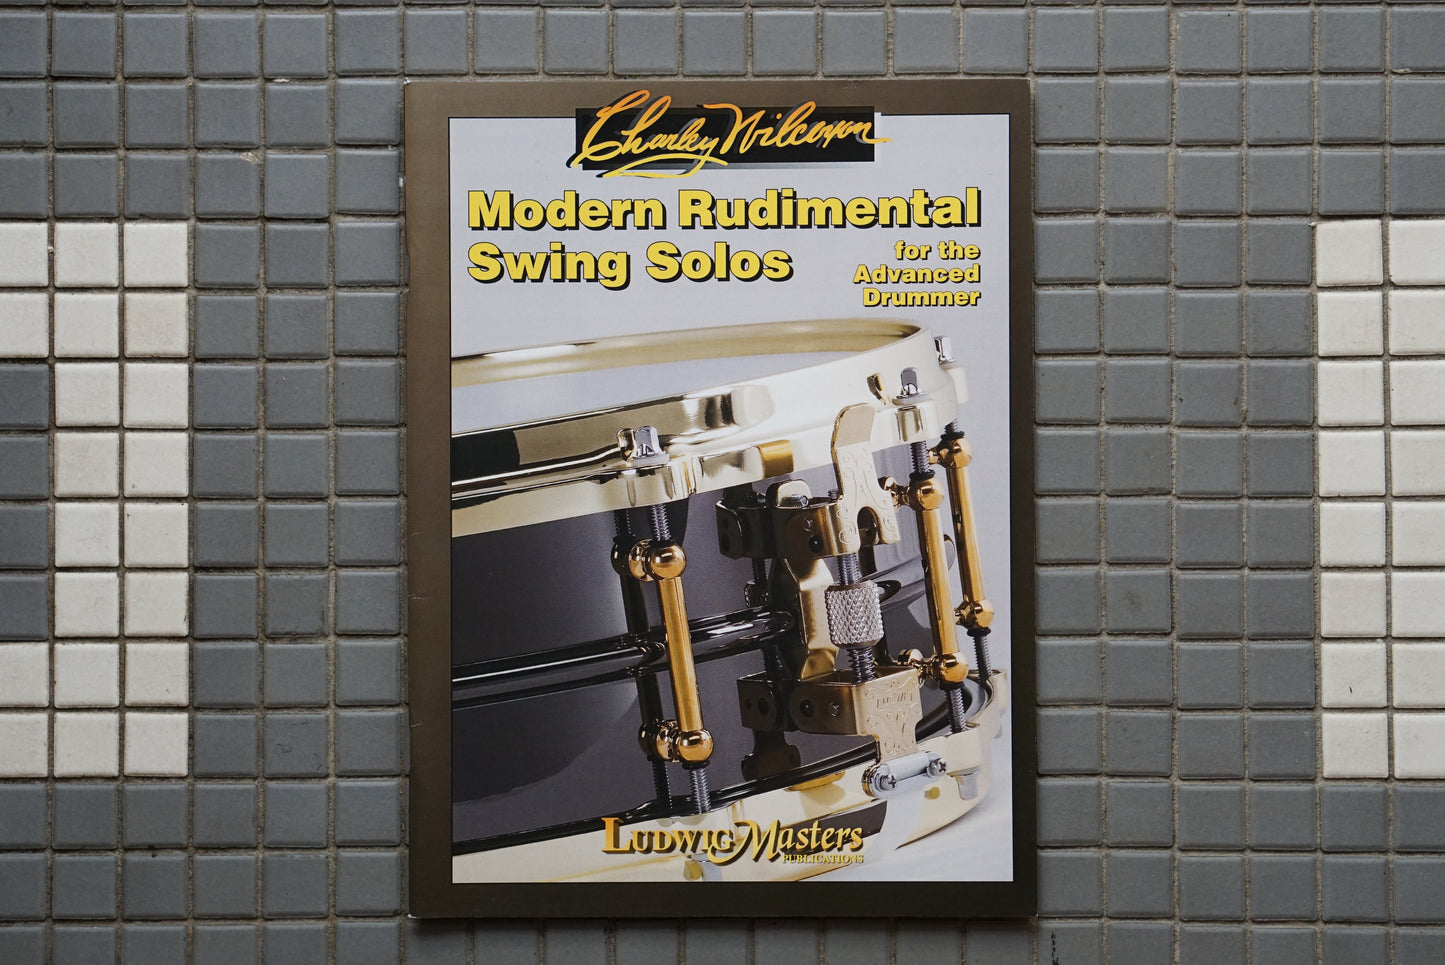 Modern Rudimental Swing Solos For the Advanced Drummer - Charley Wilcoxon